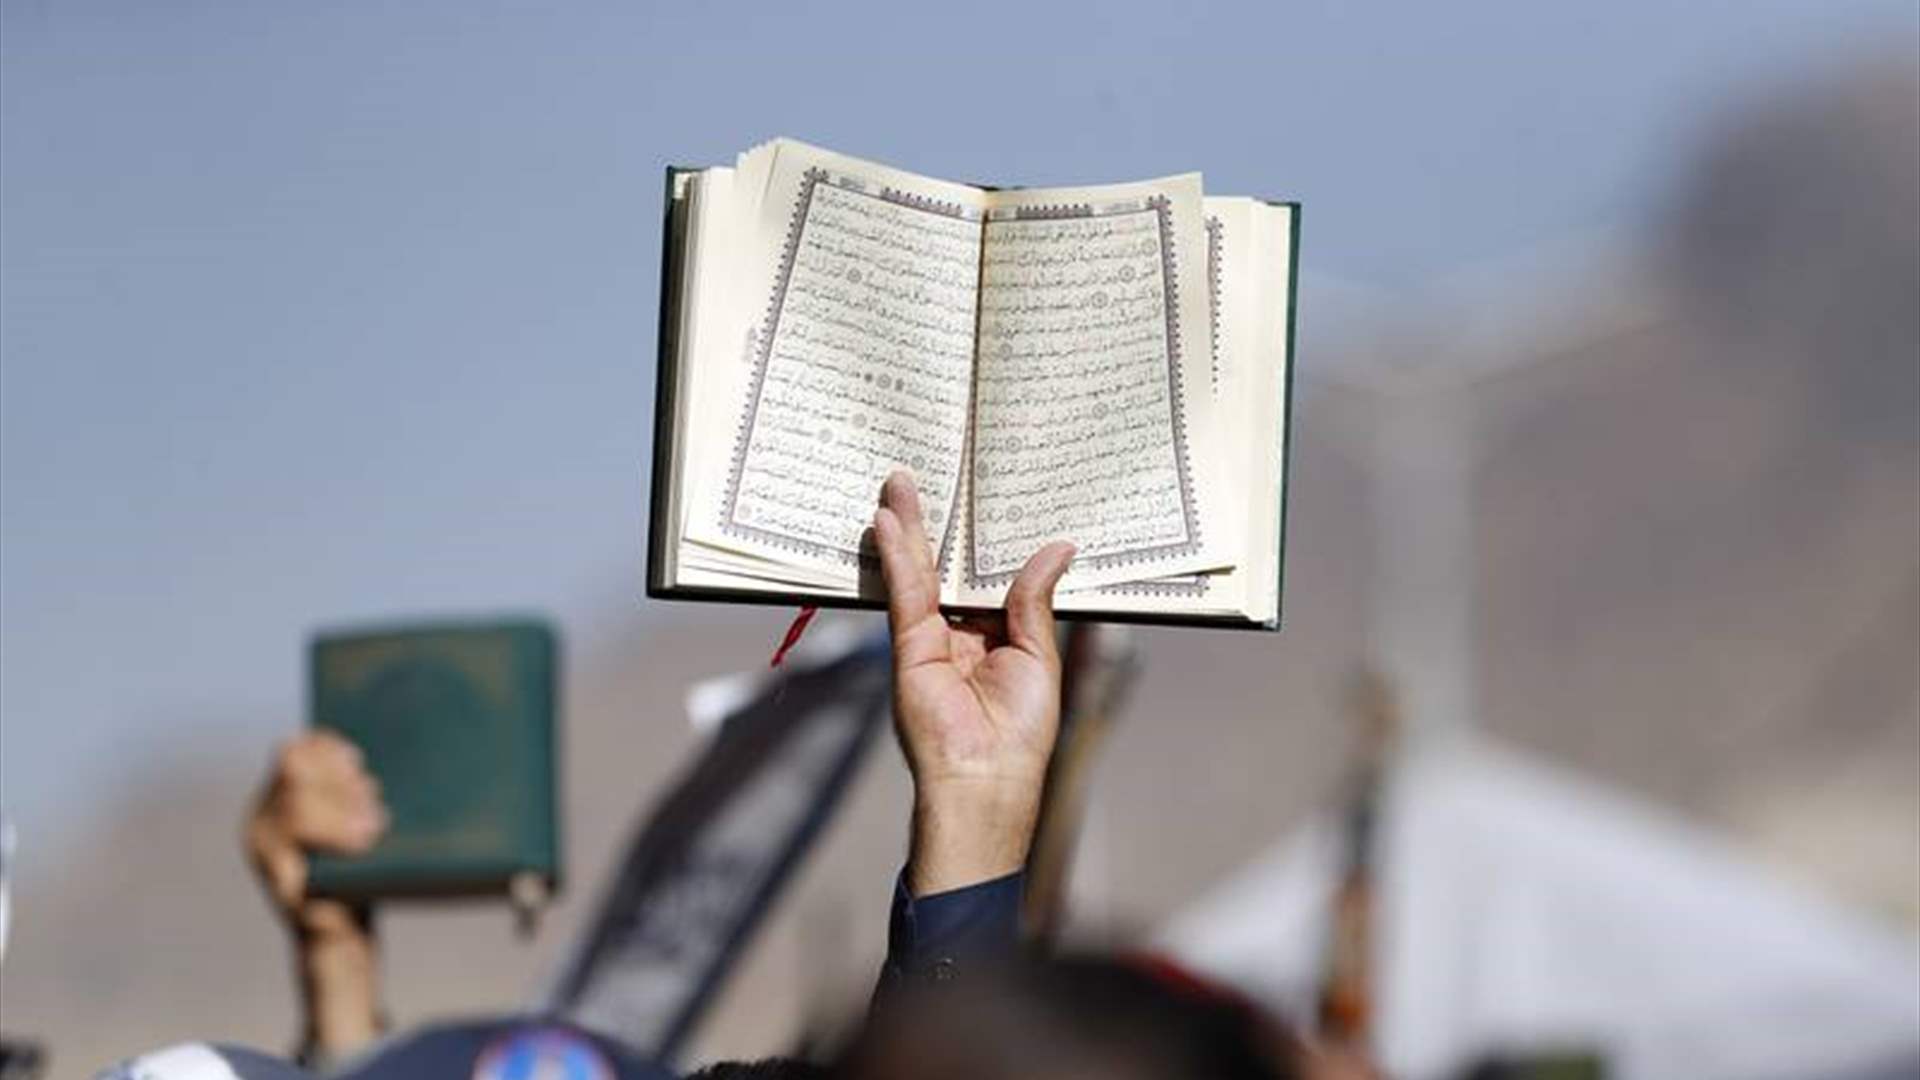 Lebanon condemns desecration of Holy Quran in Stockholm: Outrage among global Muslim community